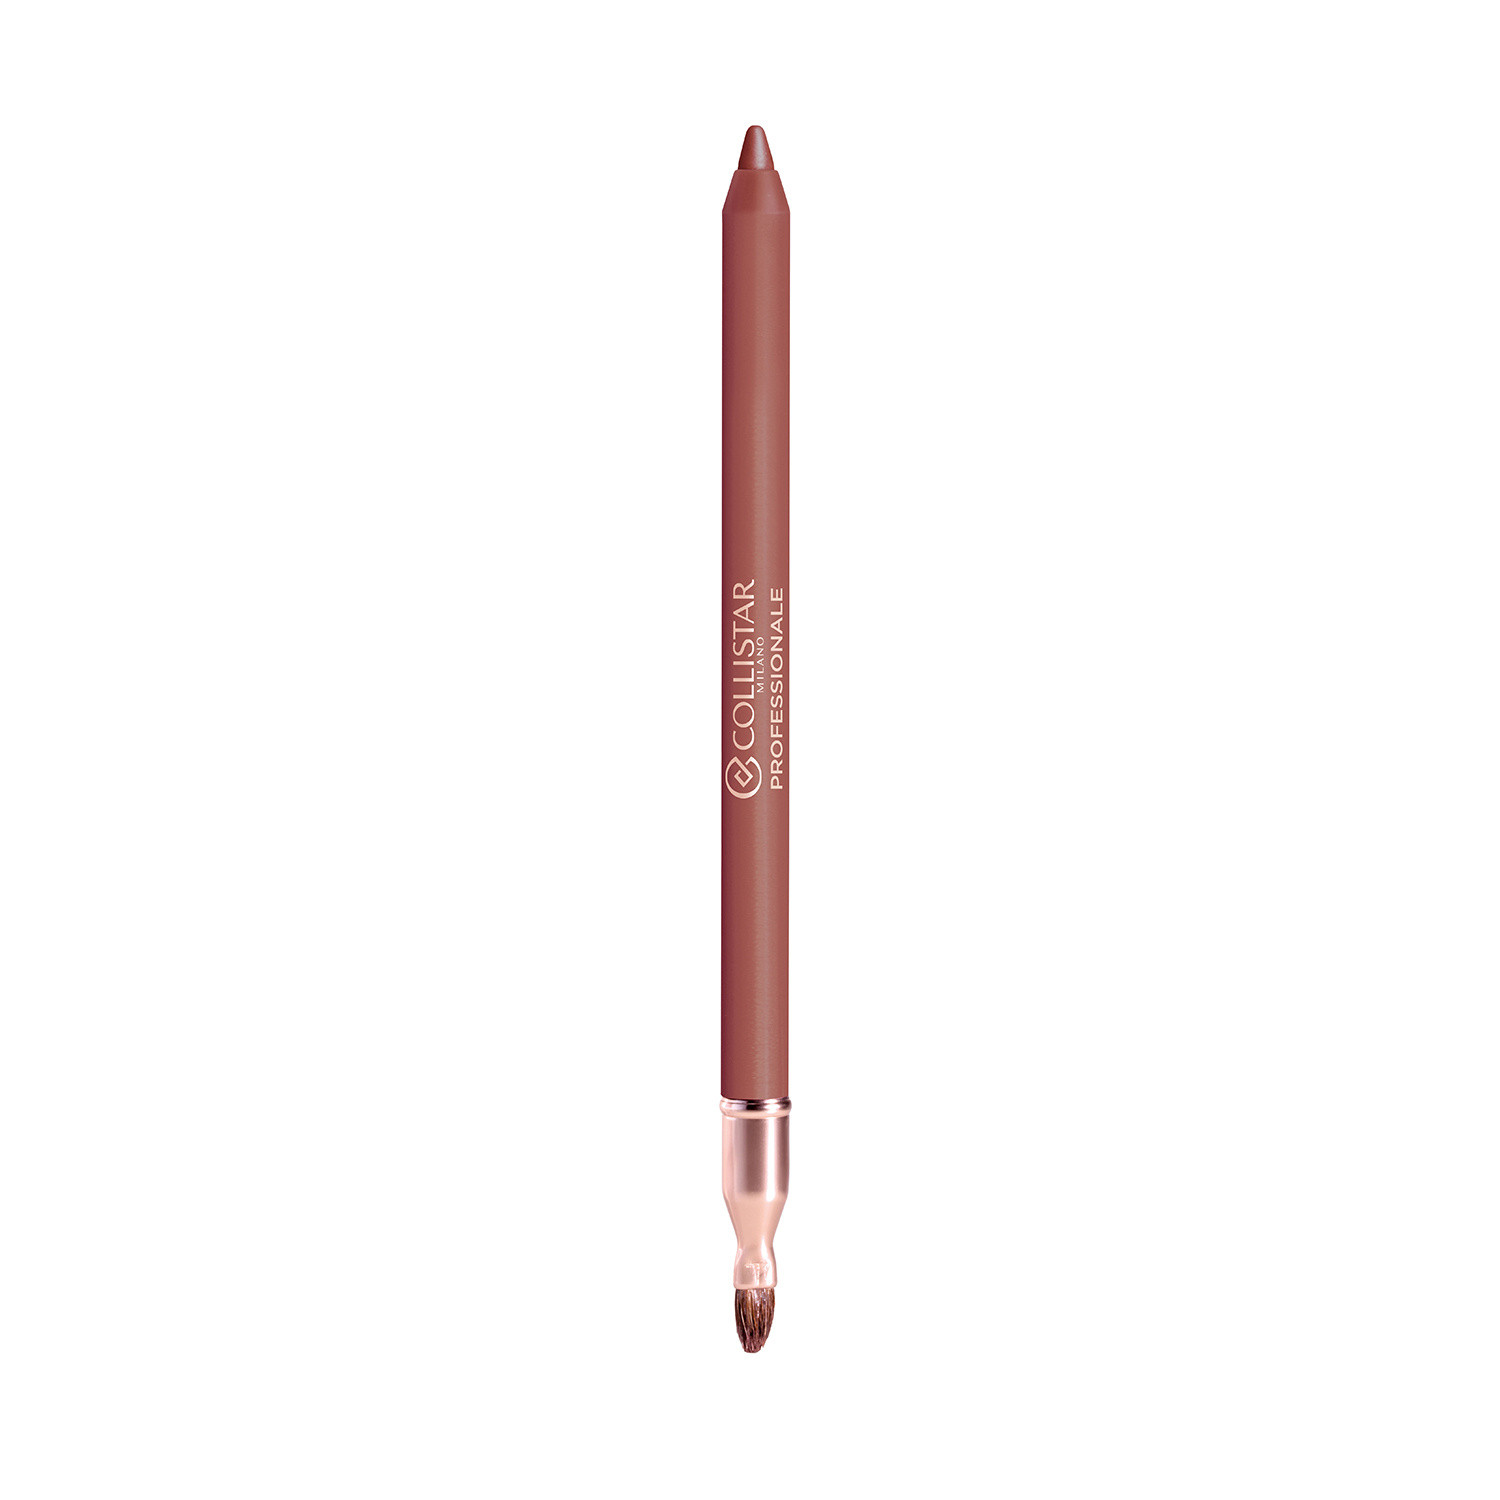 Collistar - Professional long lasting lip pencil - 2 Terracotta, Copper Brown, large image number 1